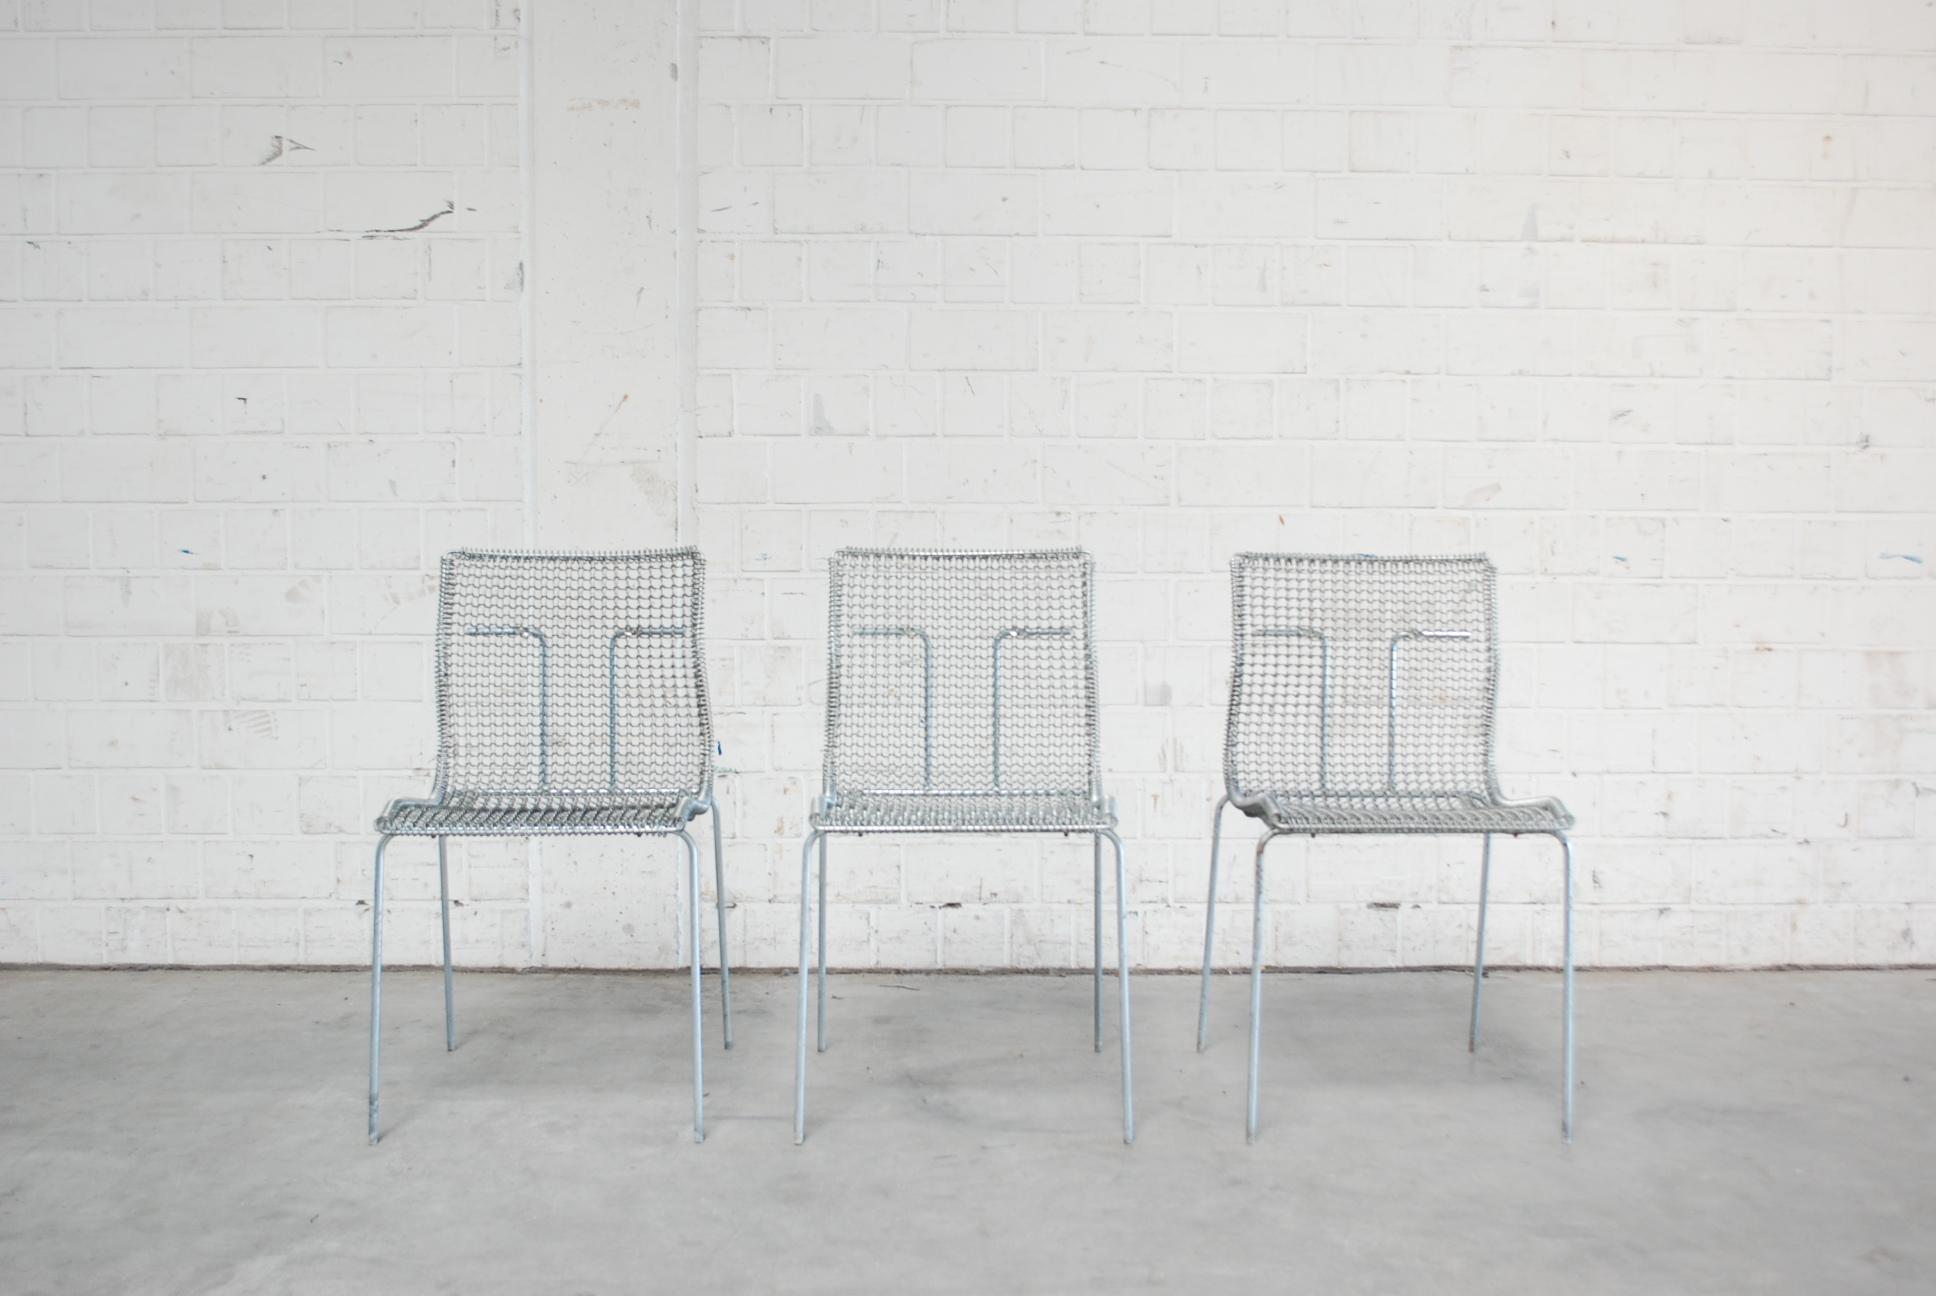 This chair was designed by architect and designer Niall O'Flynn for Dutch manufacturer spectrum in the year 1997.
It was produced for a short period of 4 years.
The chair is rare and a unique piece of Dutch design.
It has a tubular galvanized